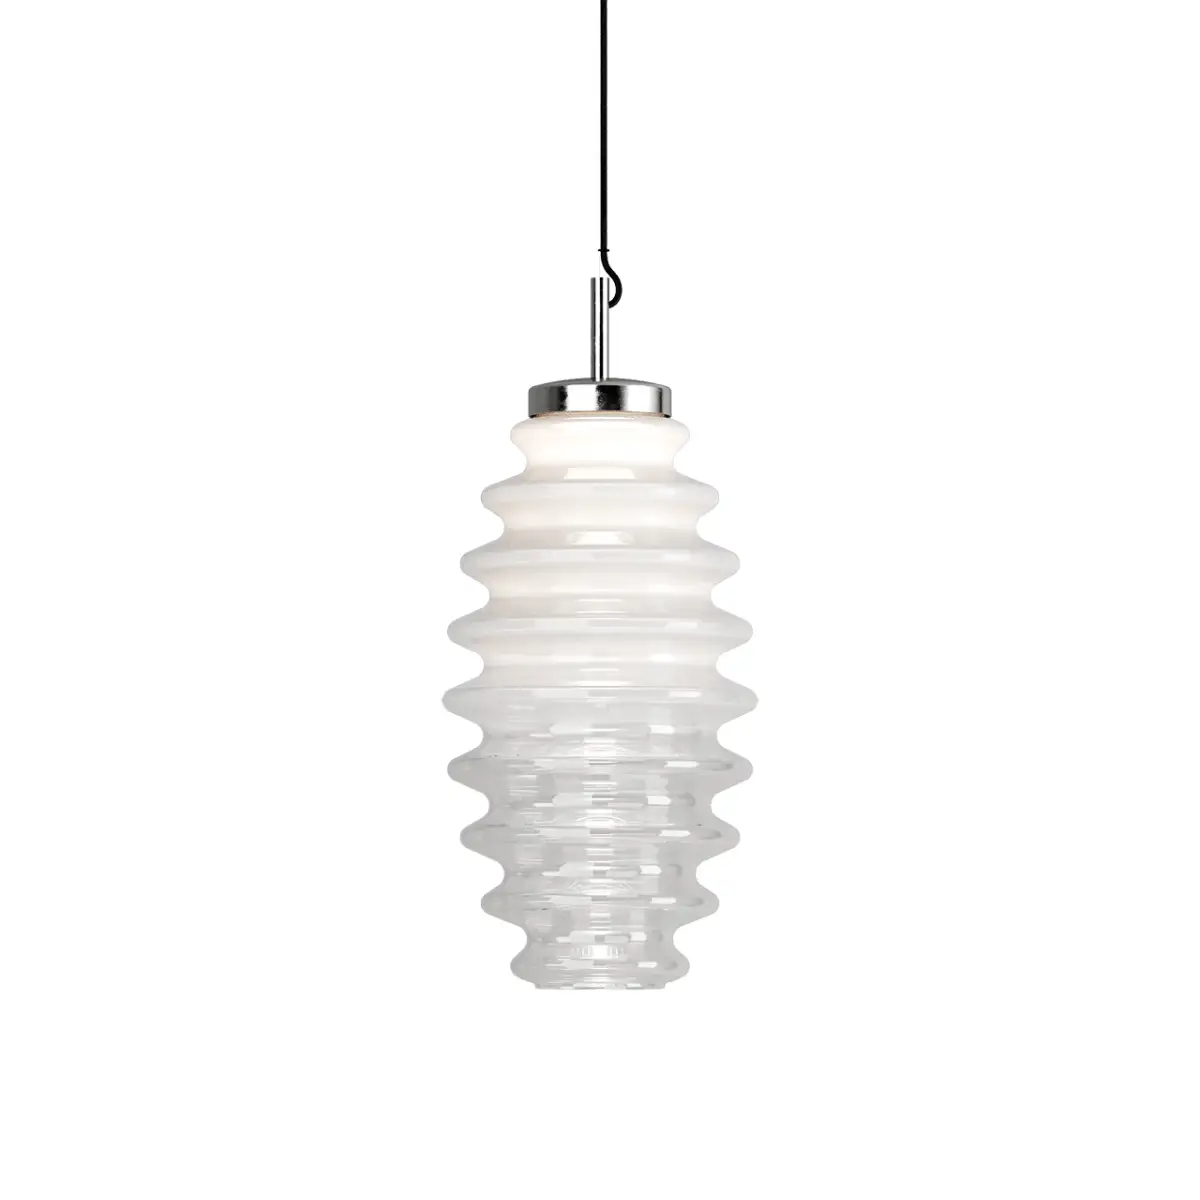 Pendant lamp GRAND COLLIER by ITALAMP